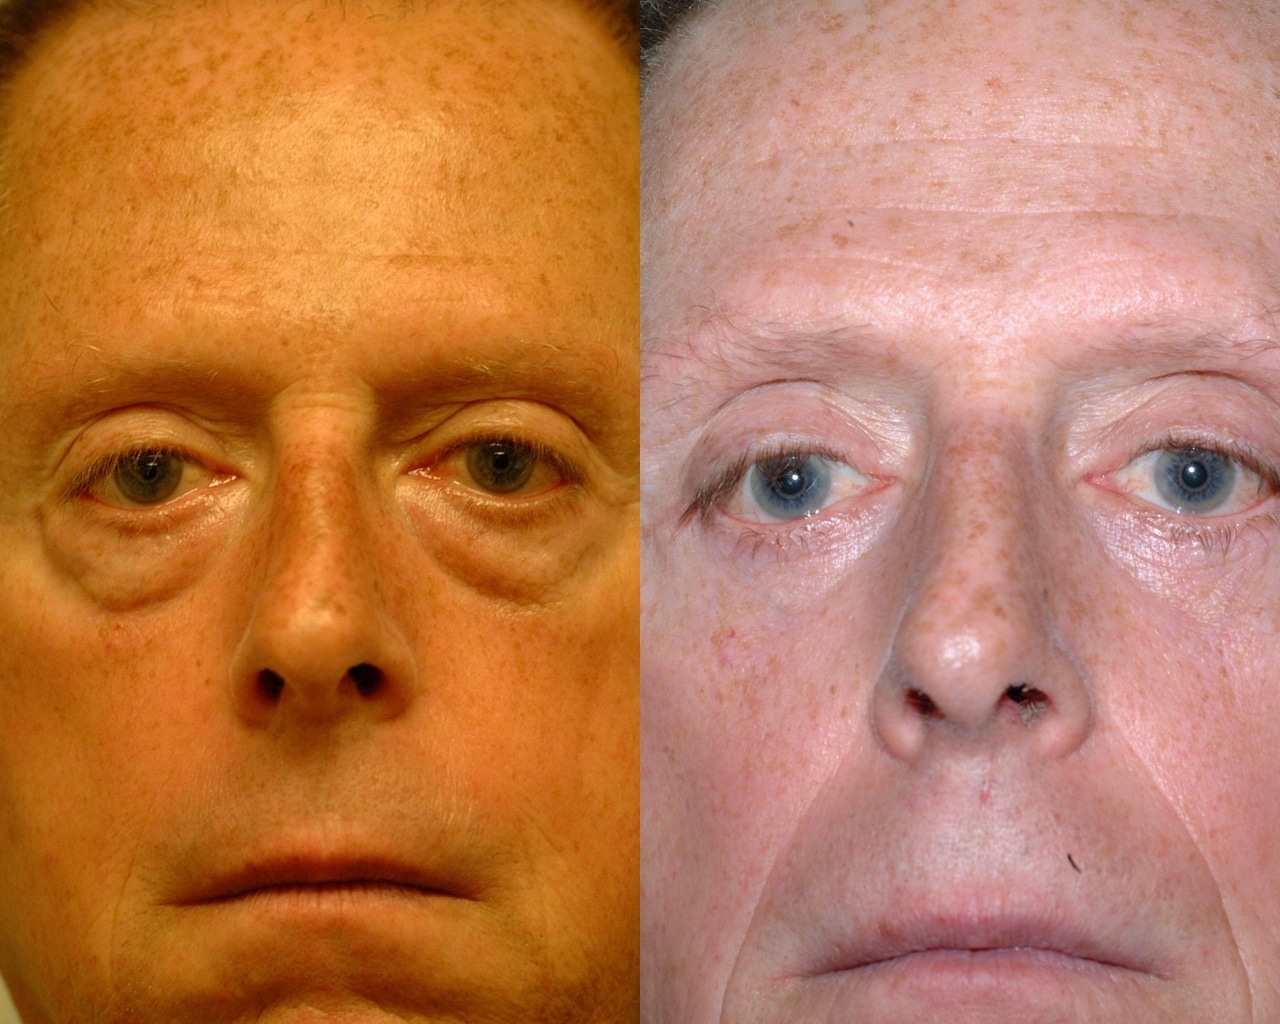 Before and after, 7 mo post op from Lower Blepharoplasty, Canthopexy performed by Dr. Paul Vanek (front view)